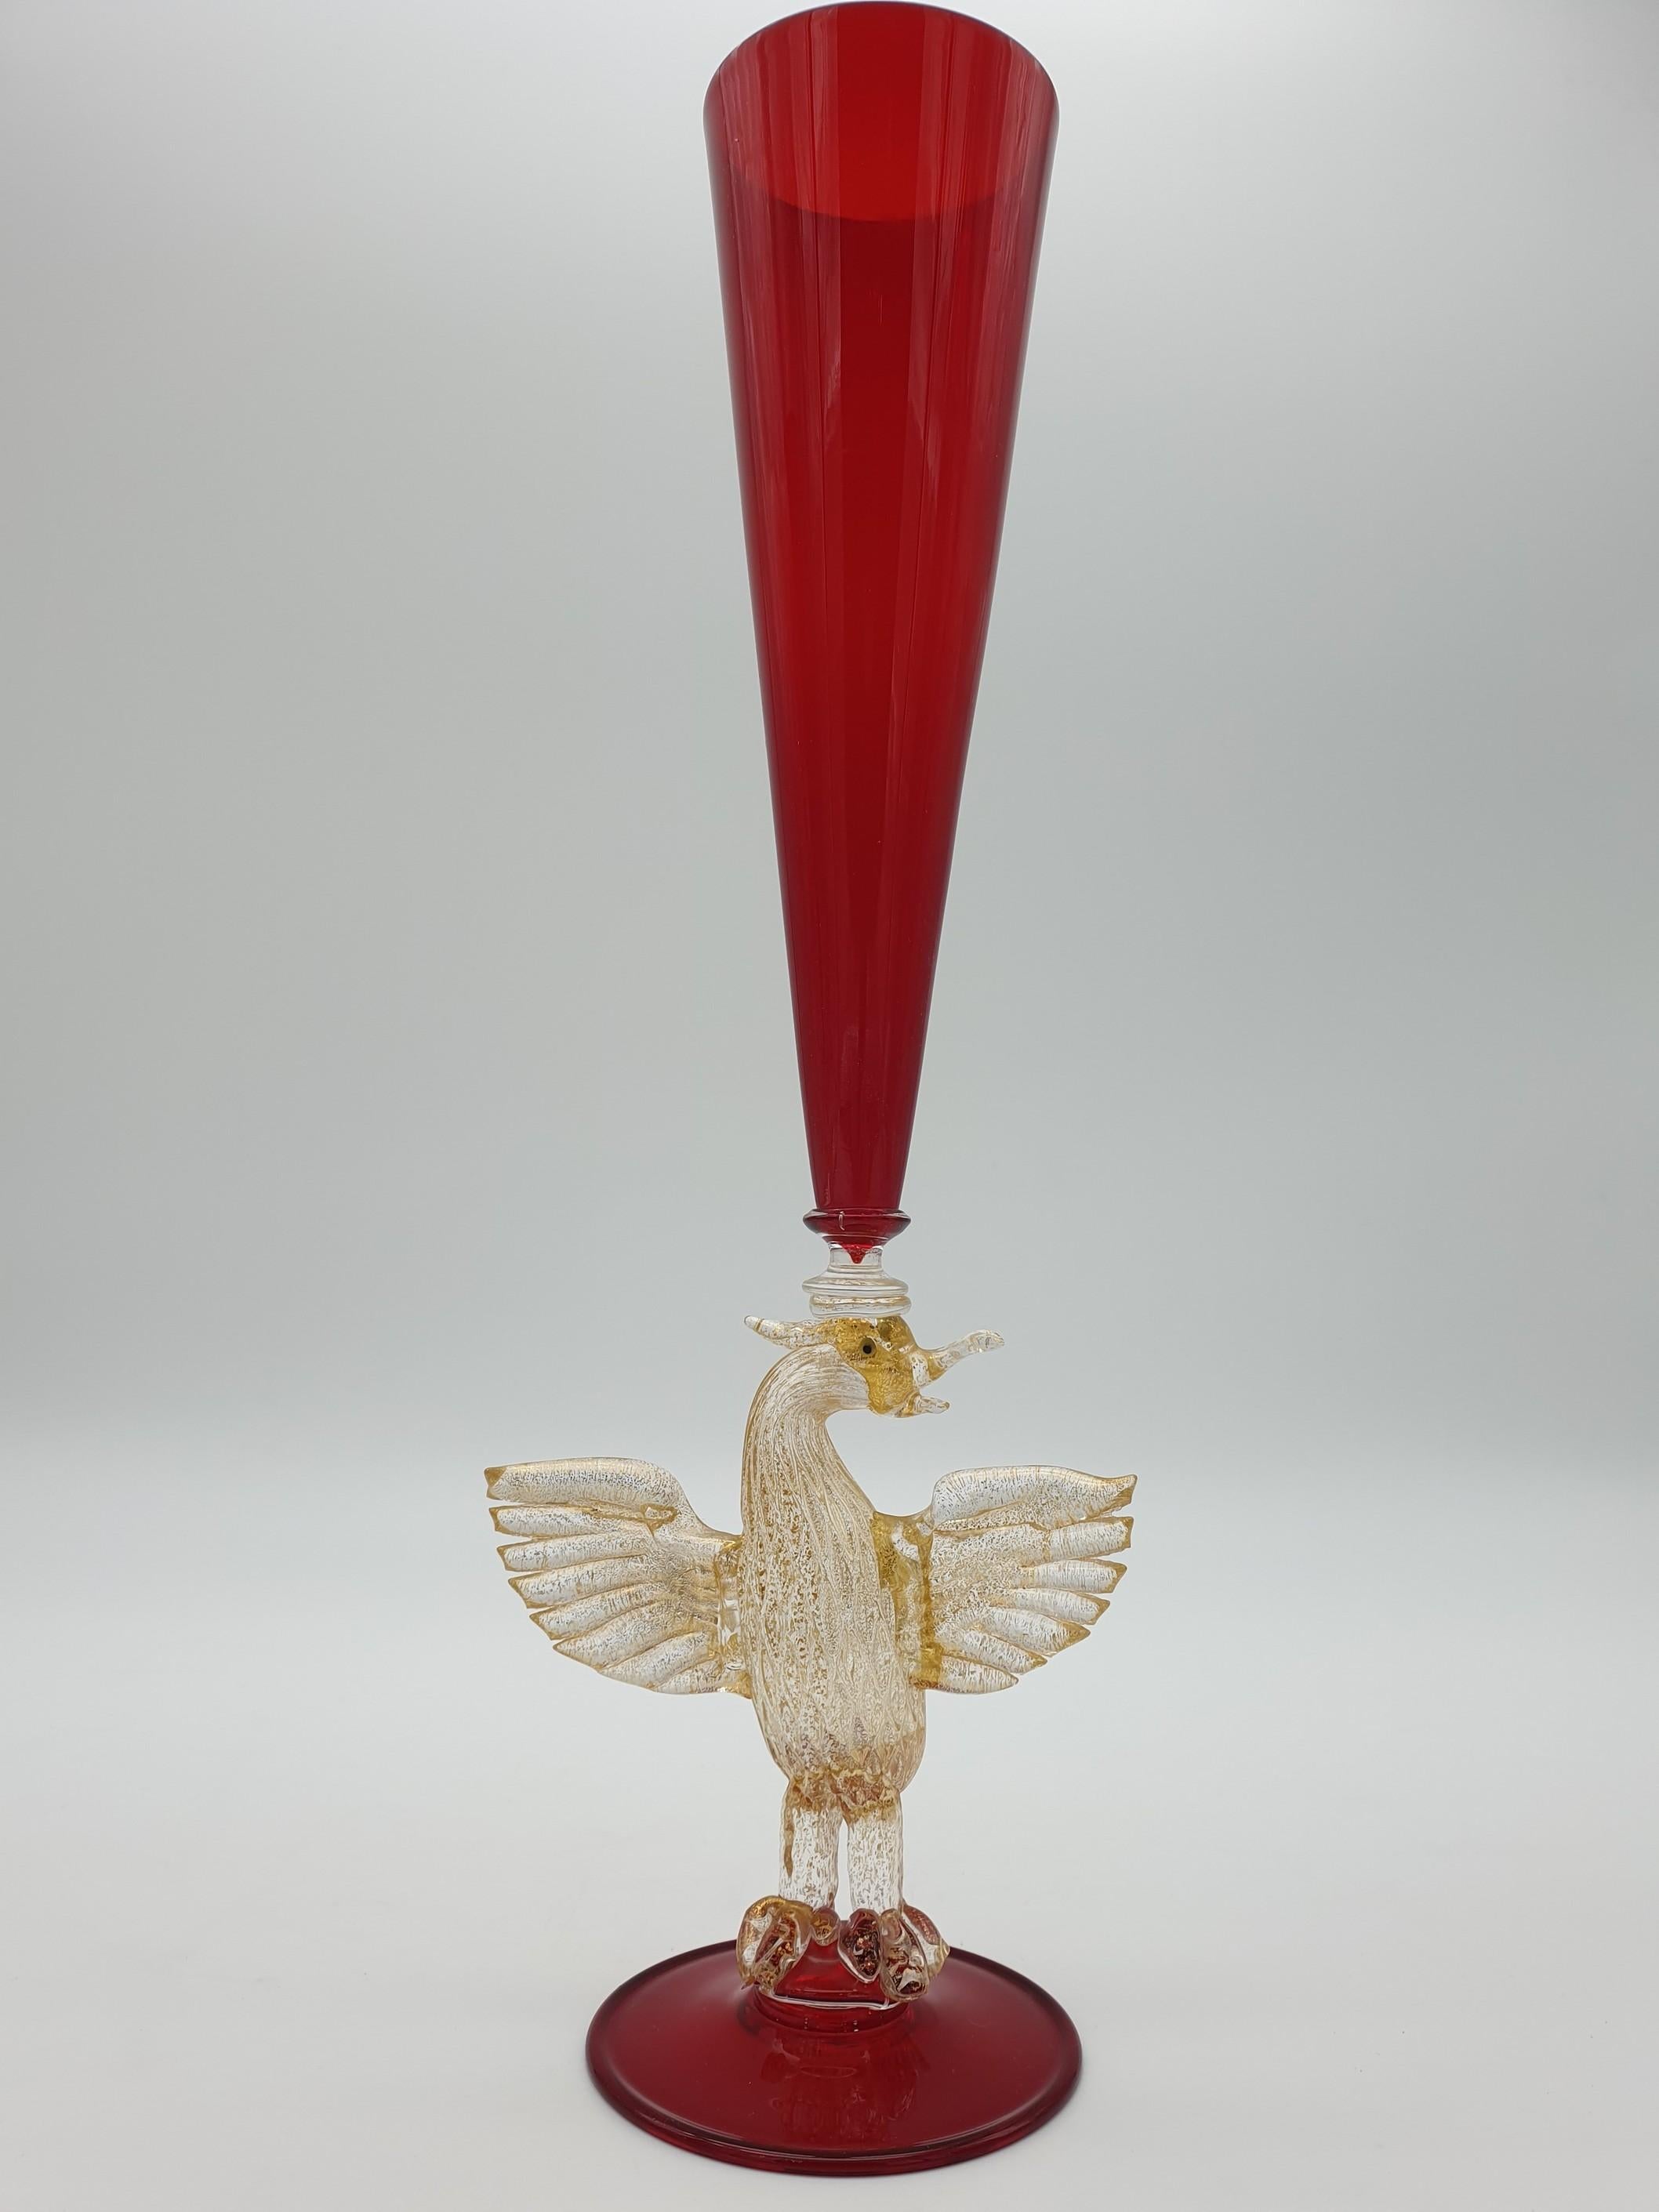 Pair of Modern Murano Glass Red Goblets with Gold Phoenix by Gino Cenedese 1990s For Sale 2